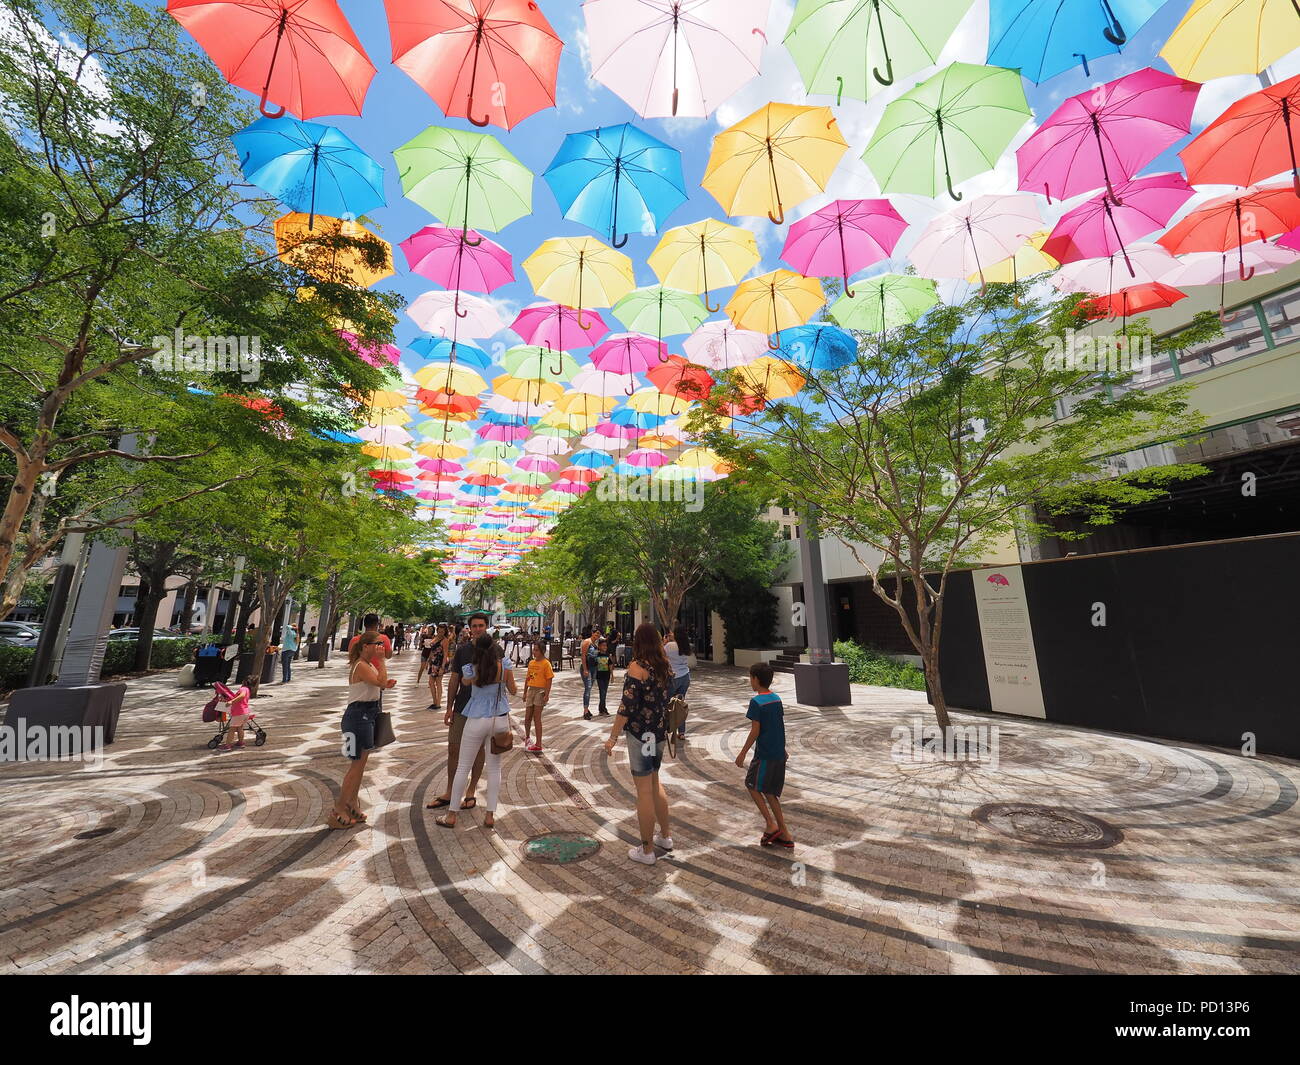 Umbrella Sky in Coral Gables, Florida, a joint art project by the City of Coral Gables and the Portuguese company Sextafeira. Stock Photo